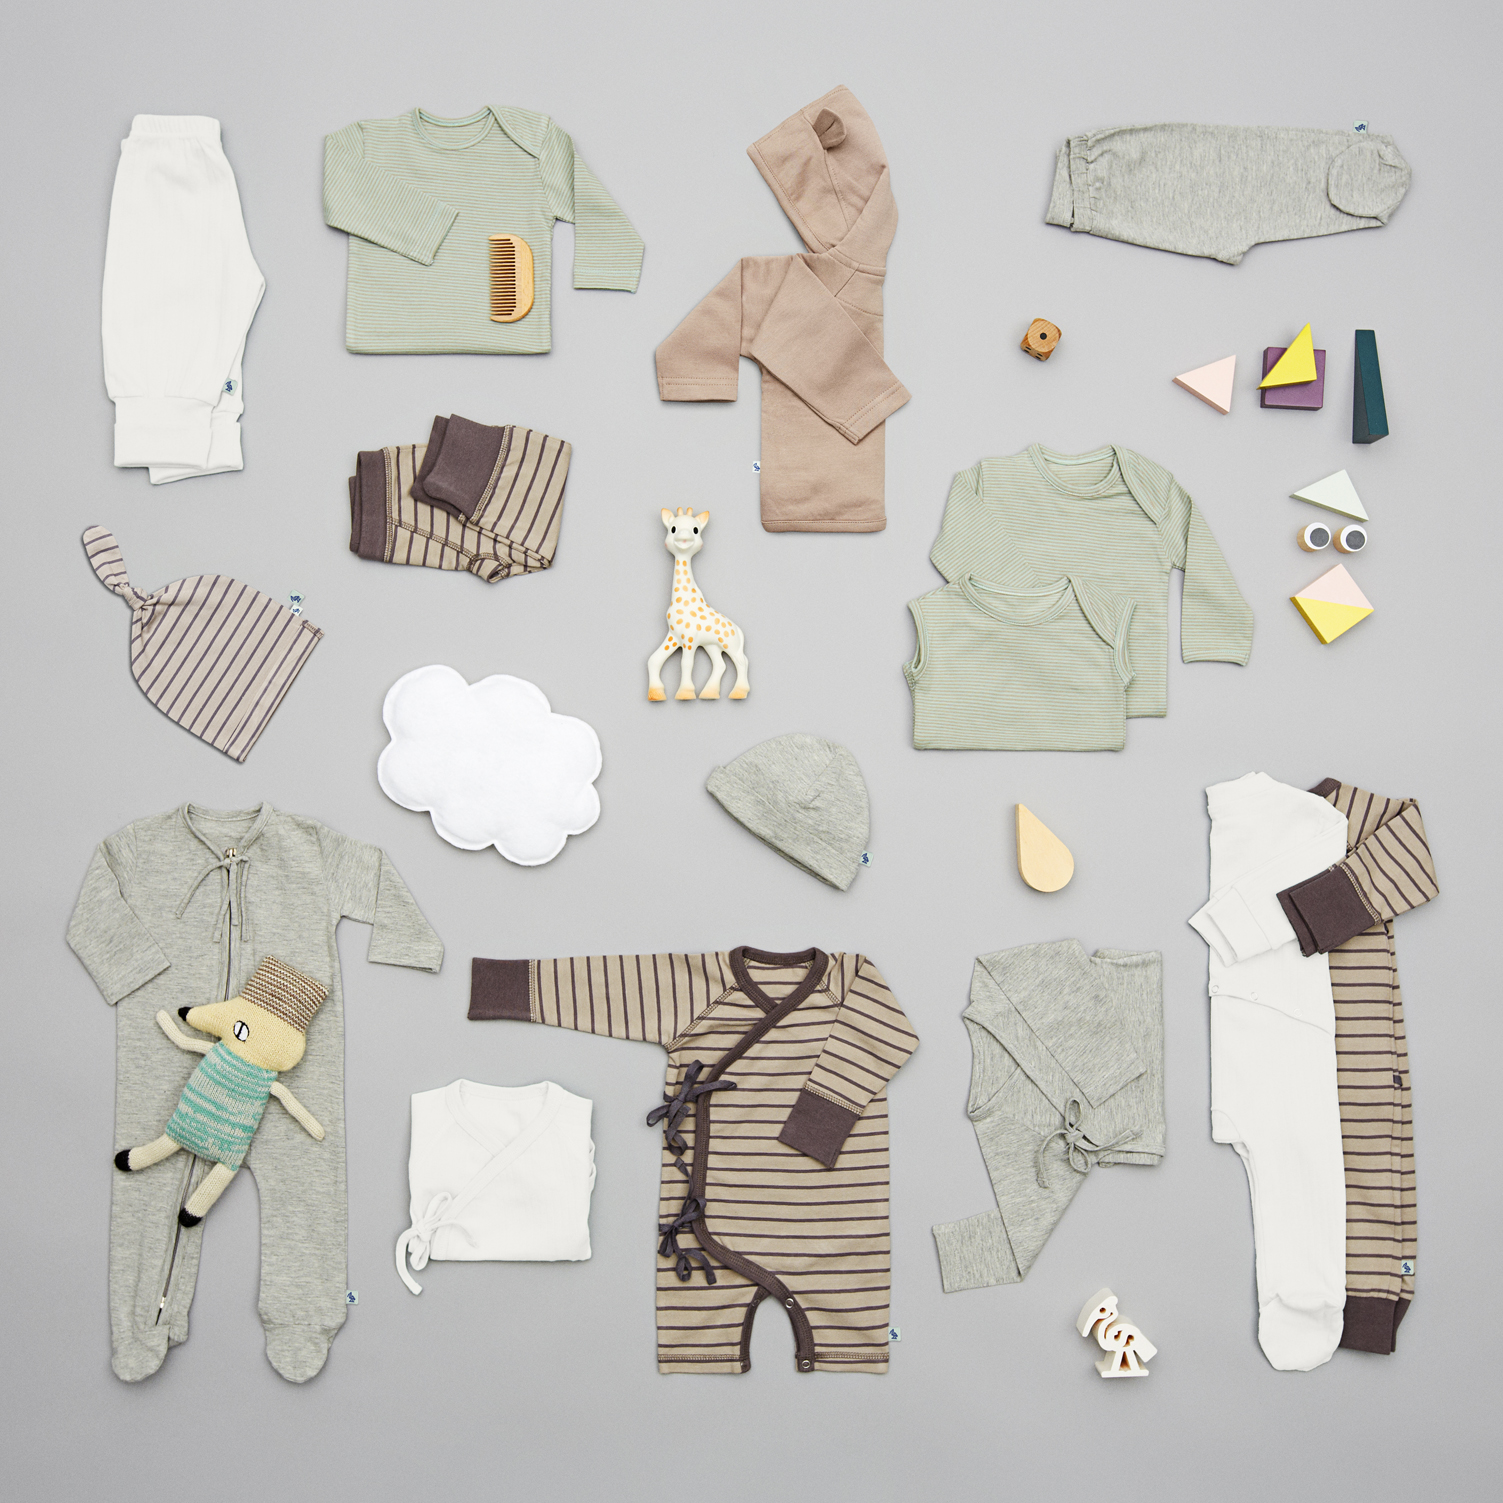 VIGGA challenges the buy-and-throw-away consumer pattern, offering a clever and attractive alternative. Sharing high quality kid’s wear between the VIGGA families we reduce the footprint by up to 80%.